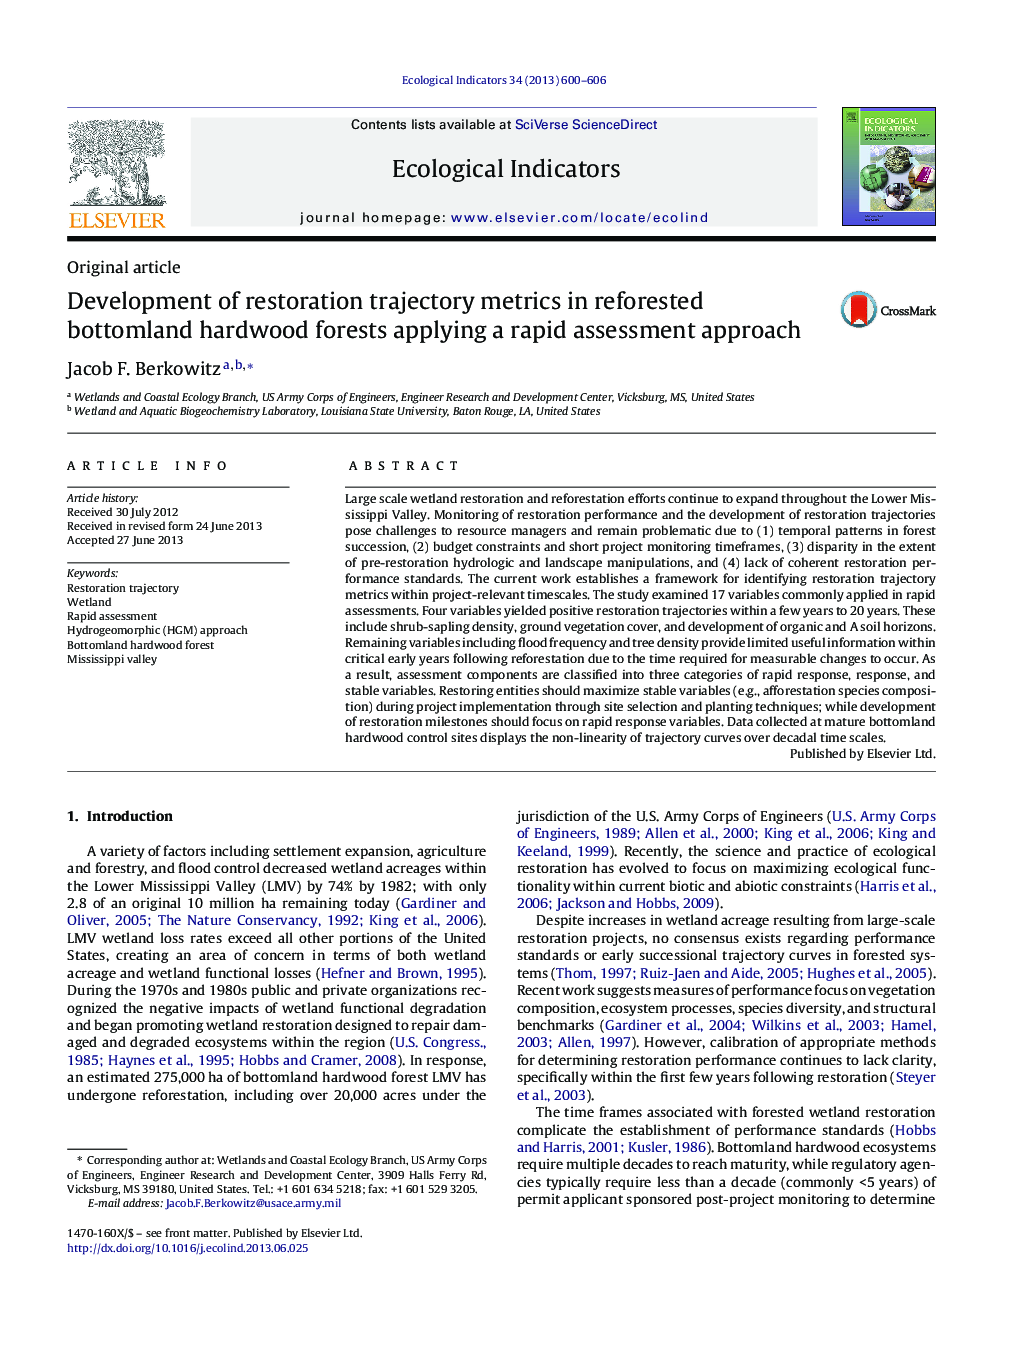 Development of restoration trajectory metrics in reforested bottomland hardwood forests applying a rapid assessment approach